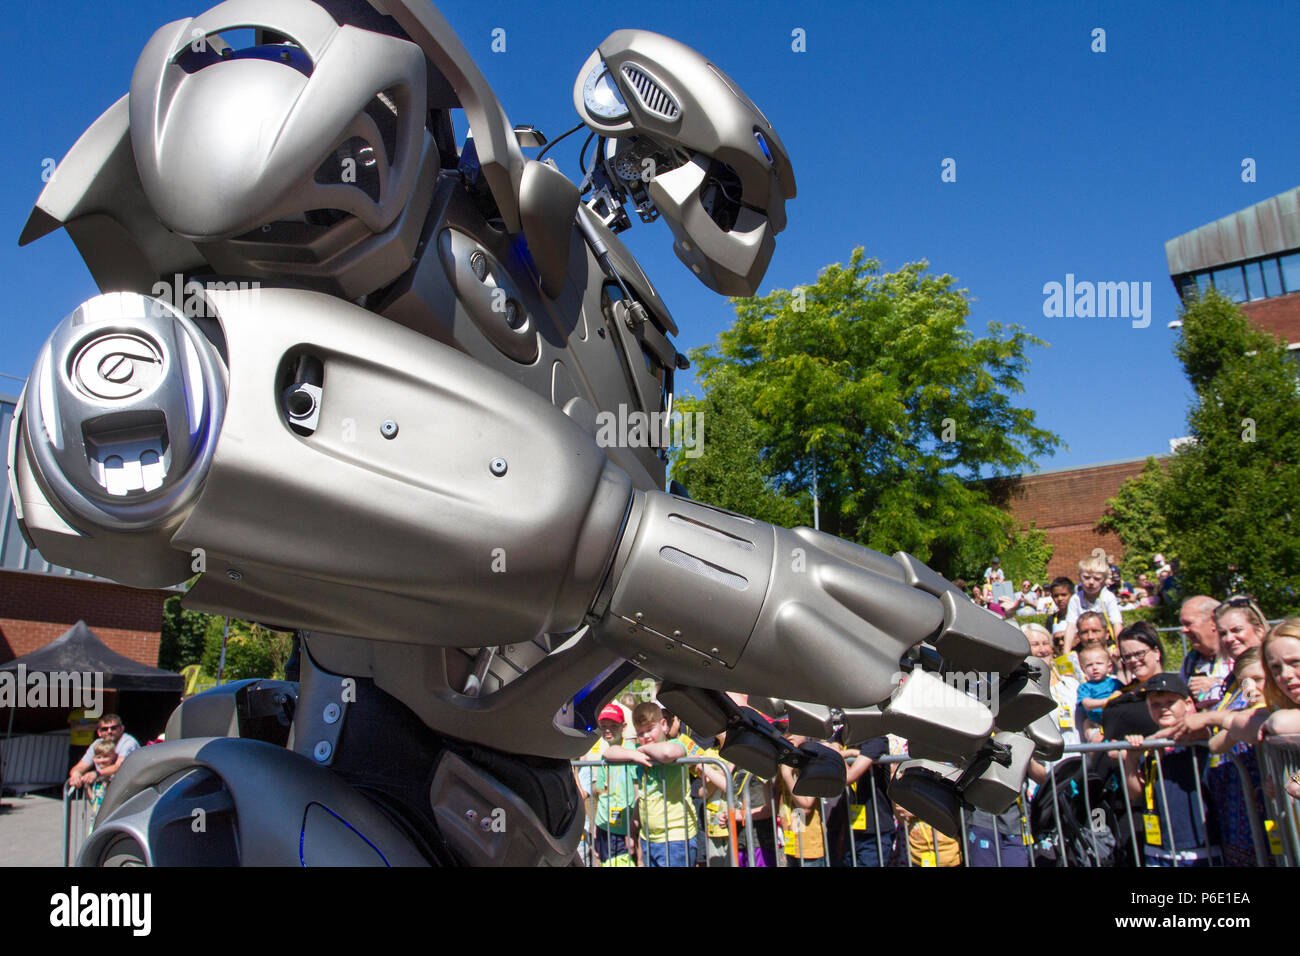 Futuristic Robotic entertainers at the Lancashire Science Festival where Titan the Robot partially-mechanised robot costume developed by the British company Cyberstein Robots performed a fun filled show to hundreds of spectators at the Lancashire University science event. Stock Photo